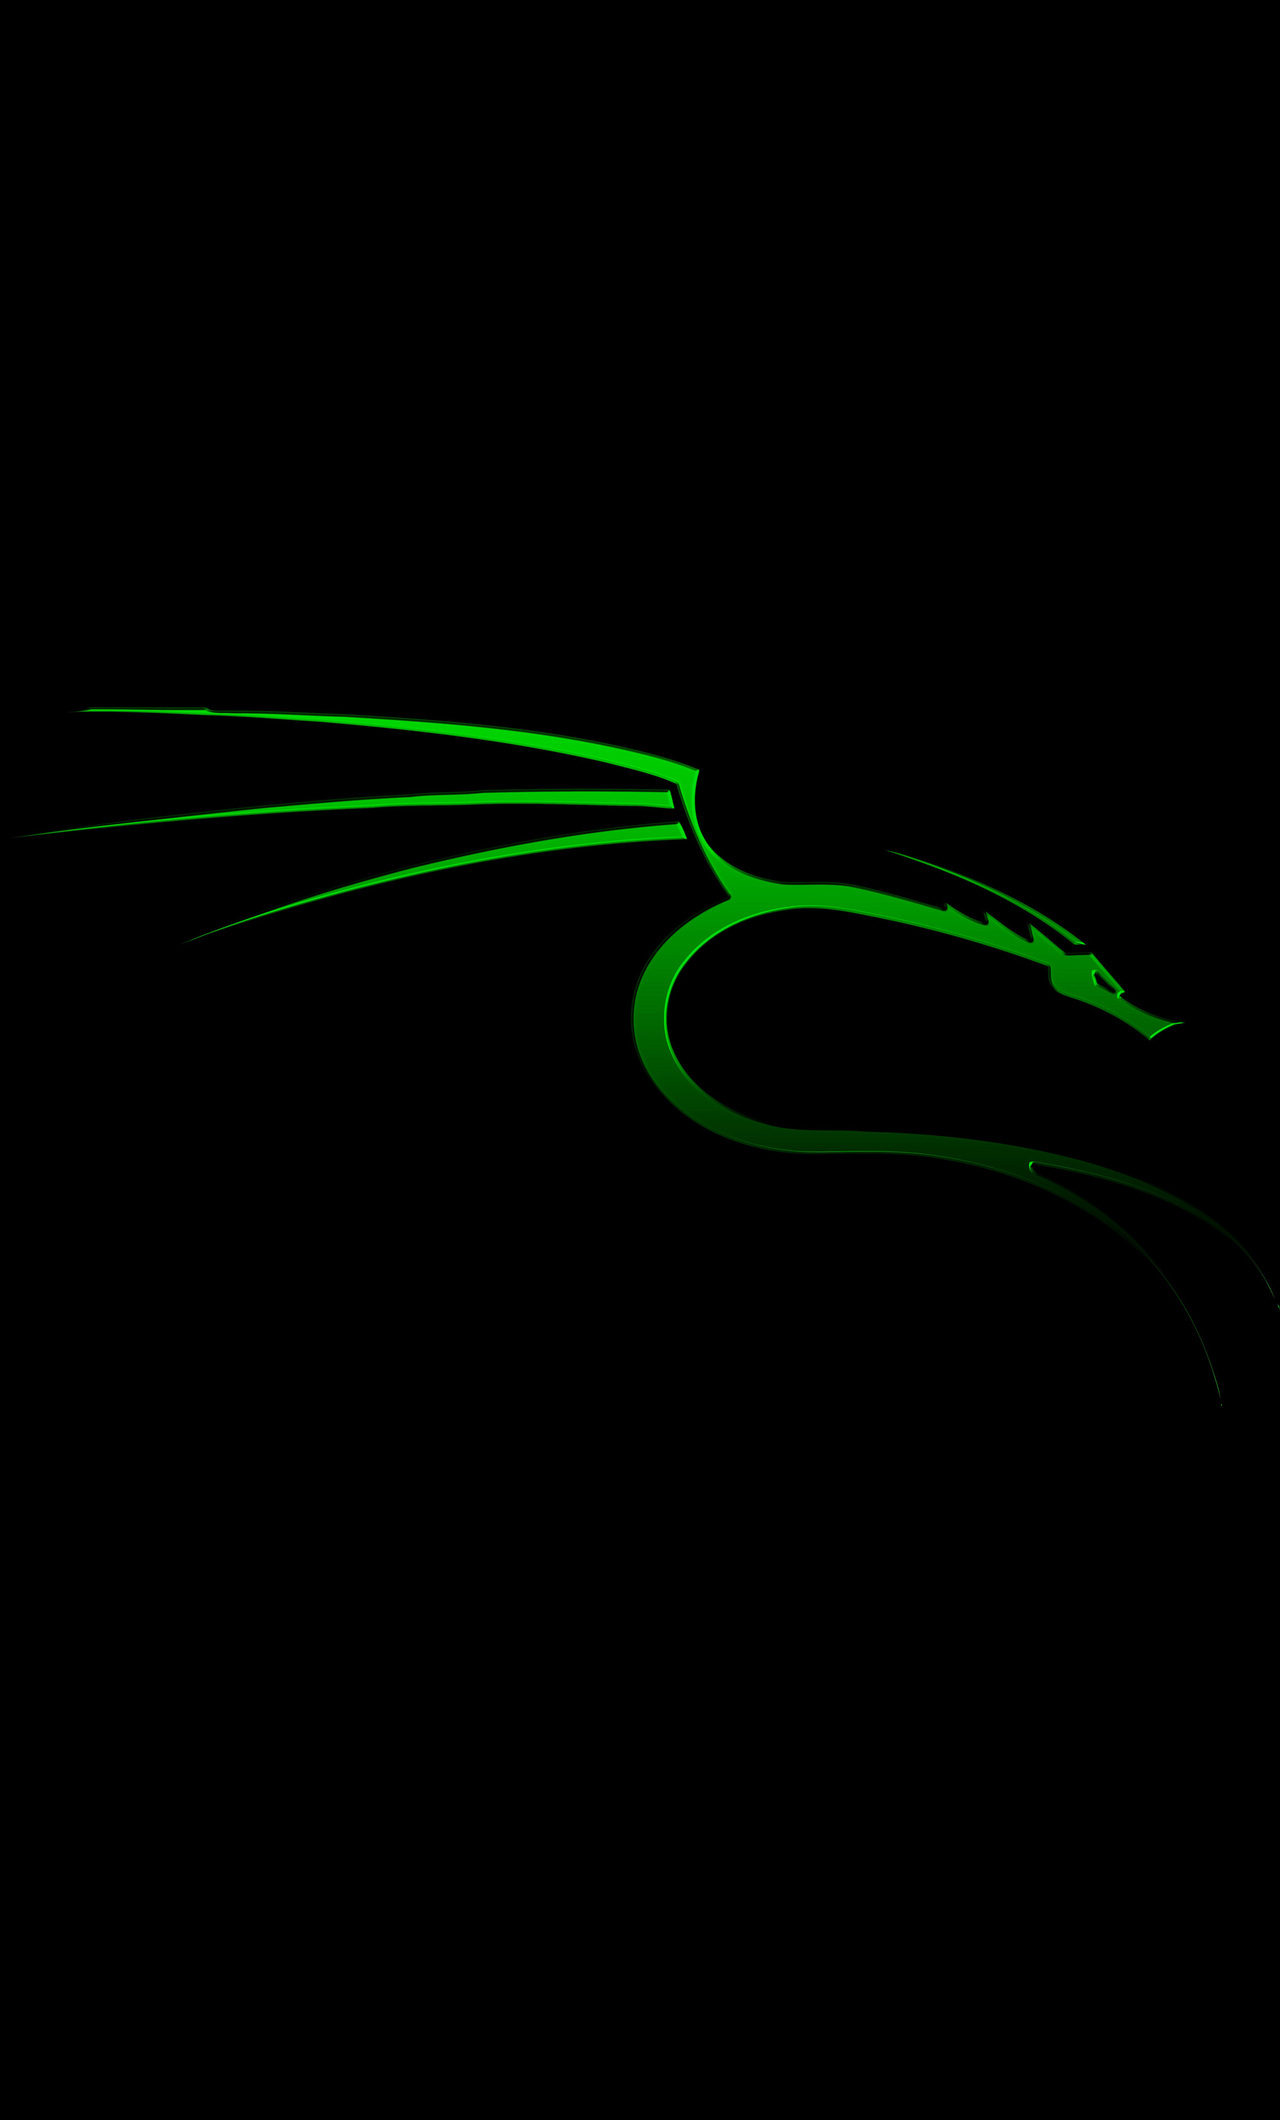 X kali linux nethunter k iphone hd k wallpapers images backgrounds photos and pictures